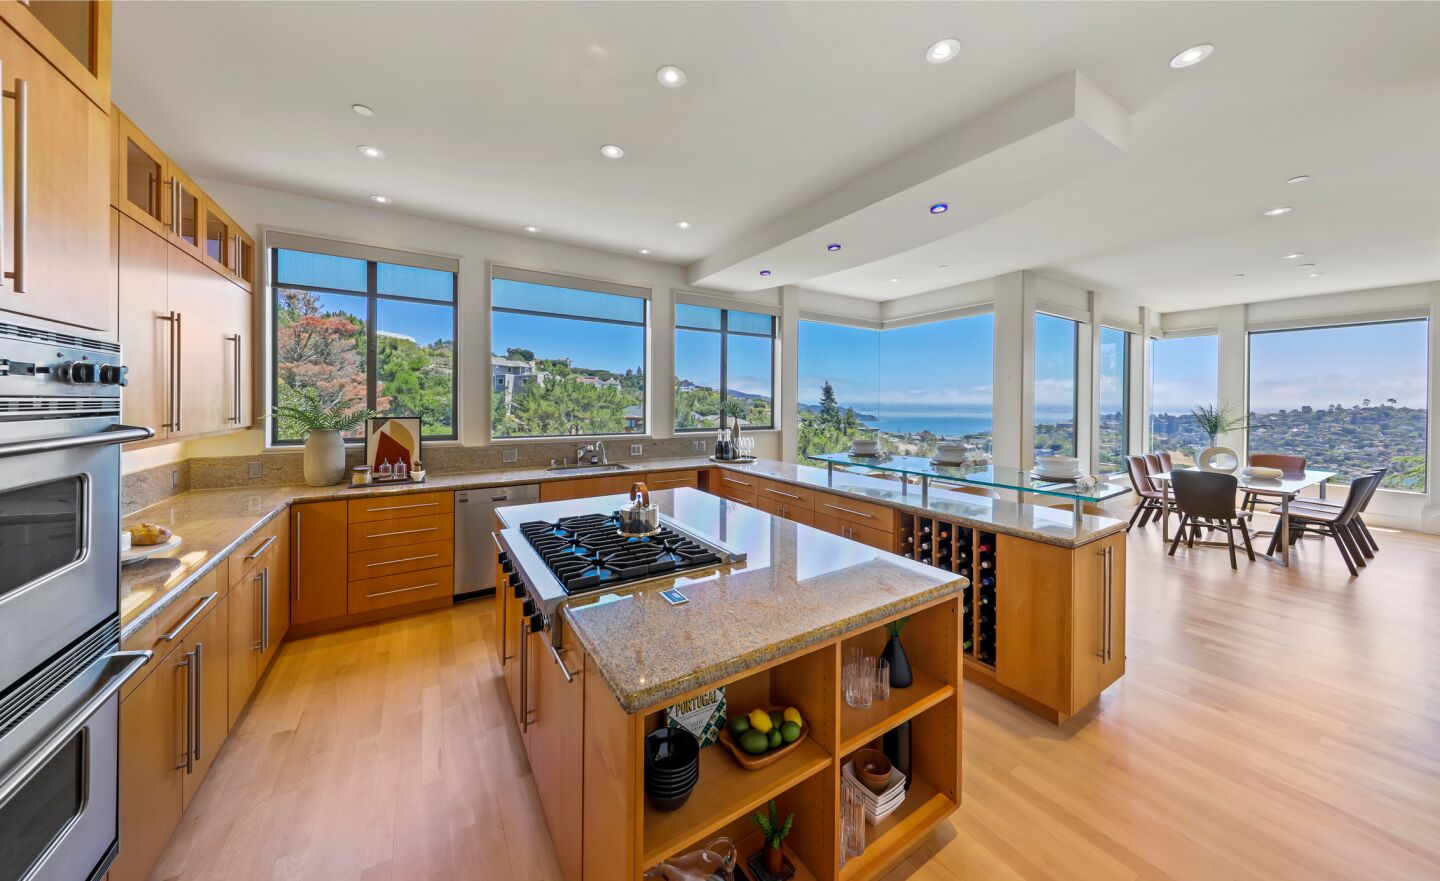 A large island sits in a kitchen with large windows and expansive views.